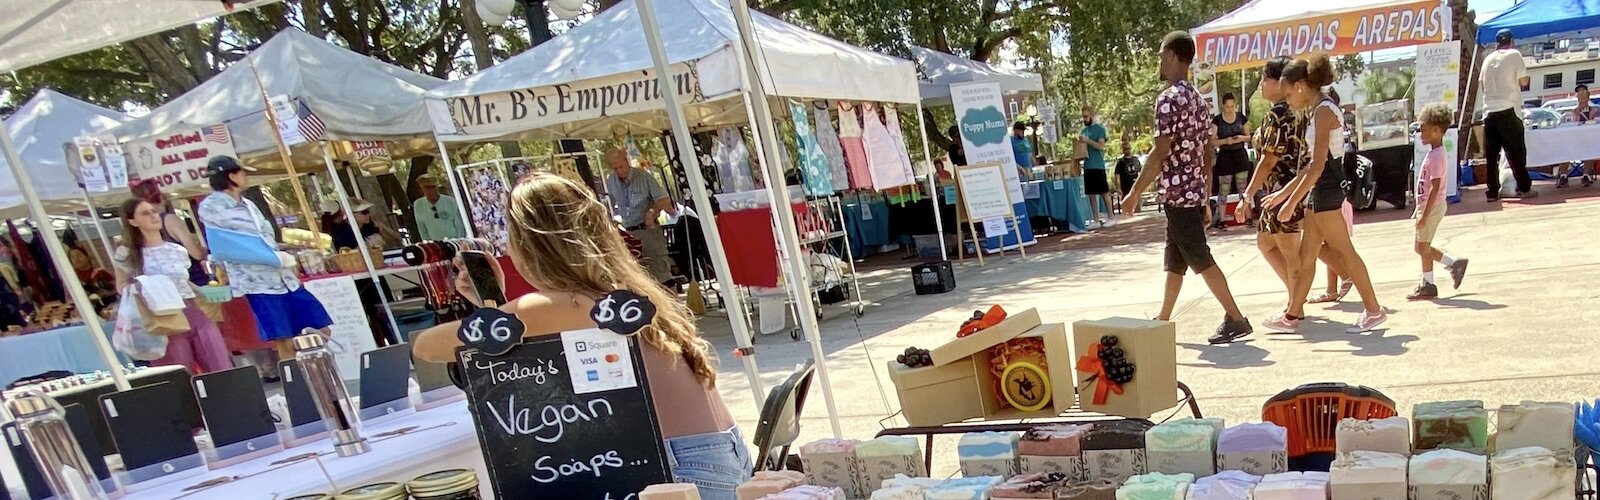 A&C (Aroma and Color), a family-owned company in Tampa, sells hand-made soaps in the midst of a sea of vendors and visitors to the Saturday Market.